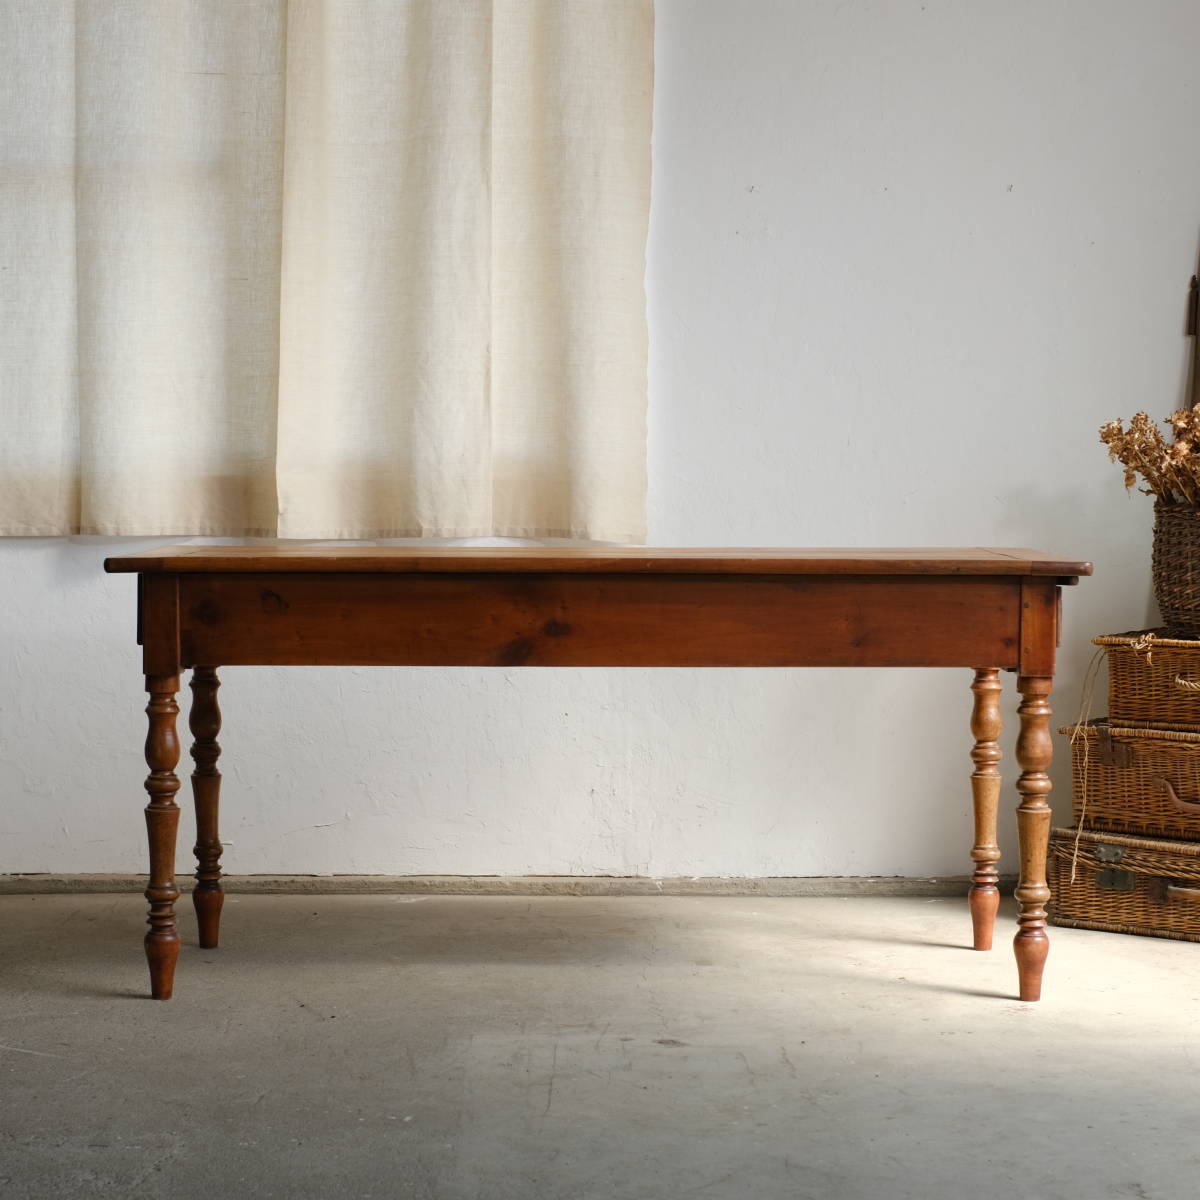  France antique * French table * antique furniture / Vintage /bro can to/ natural / store furniture / display 